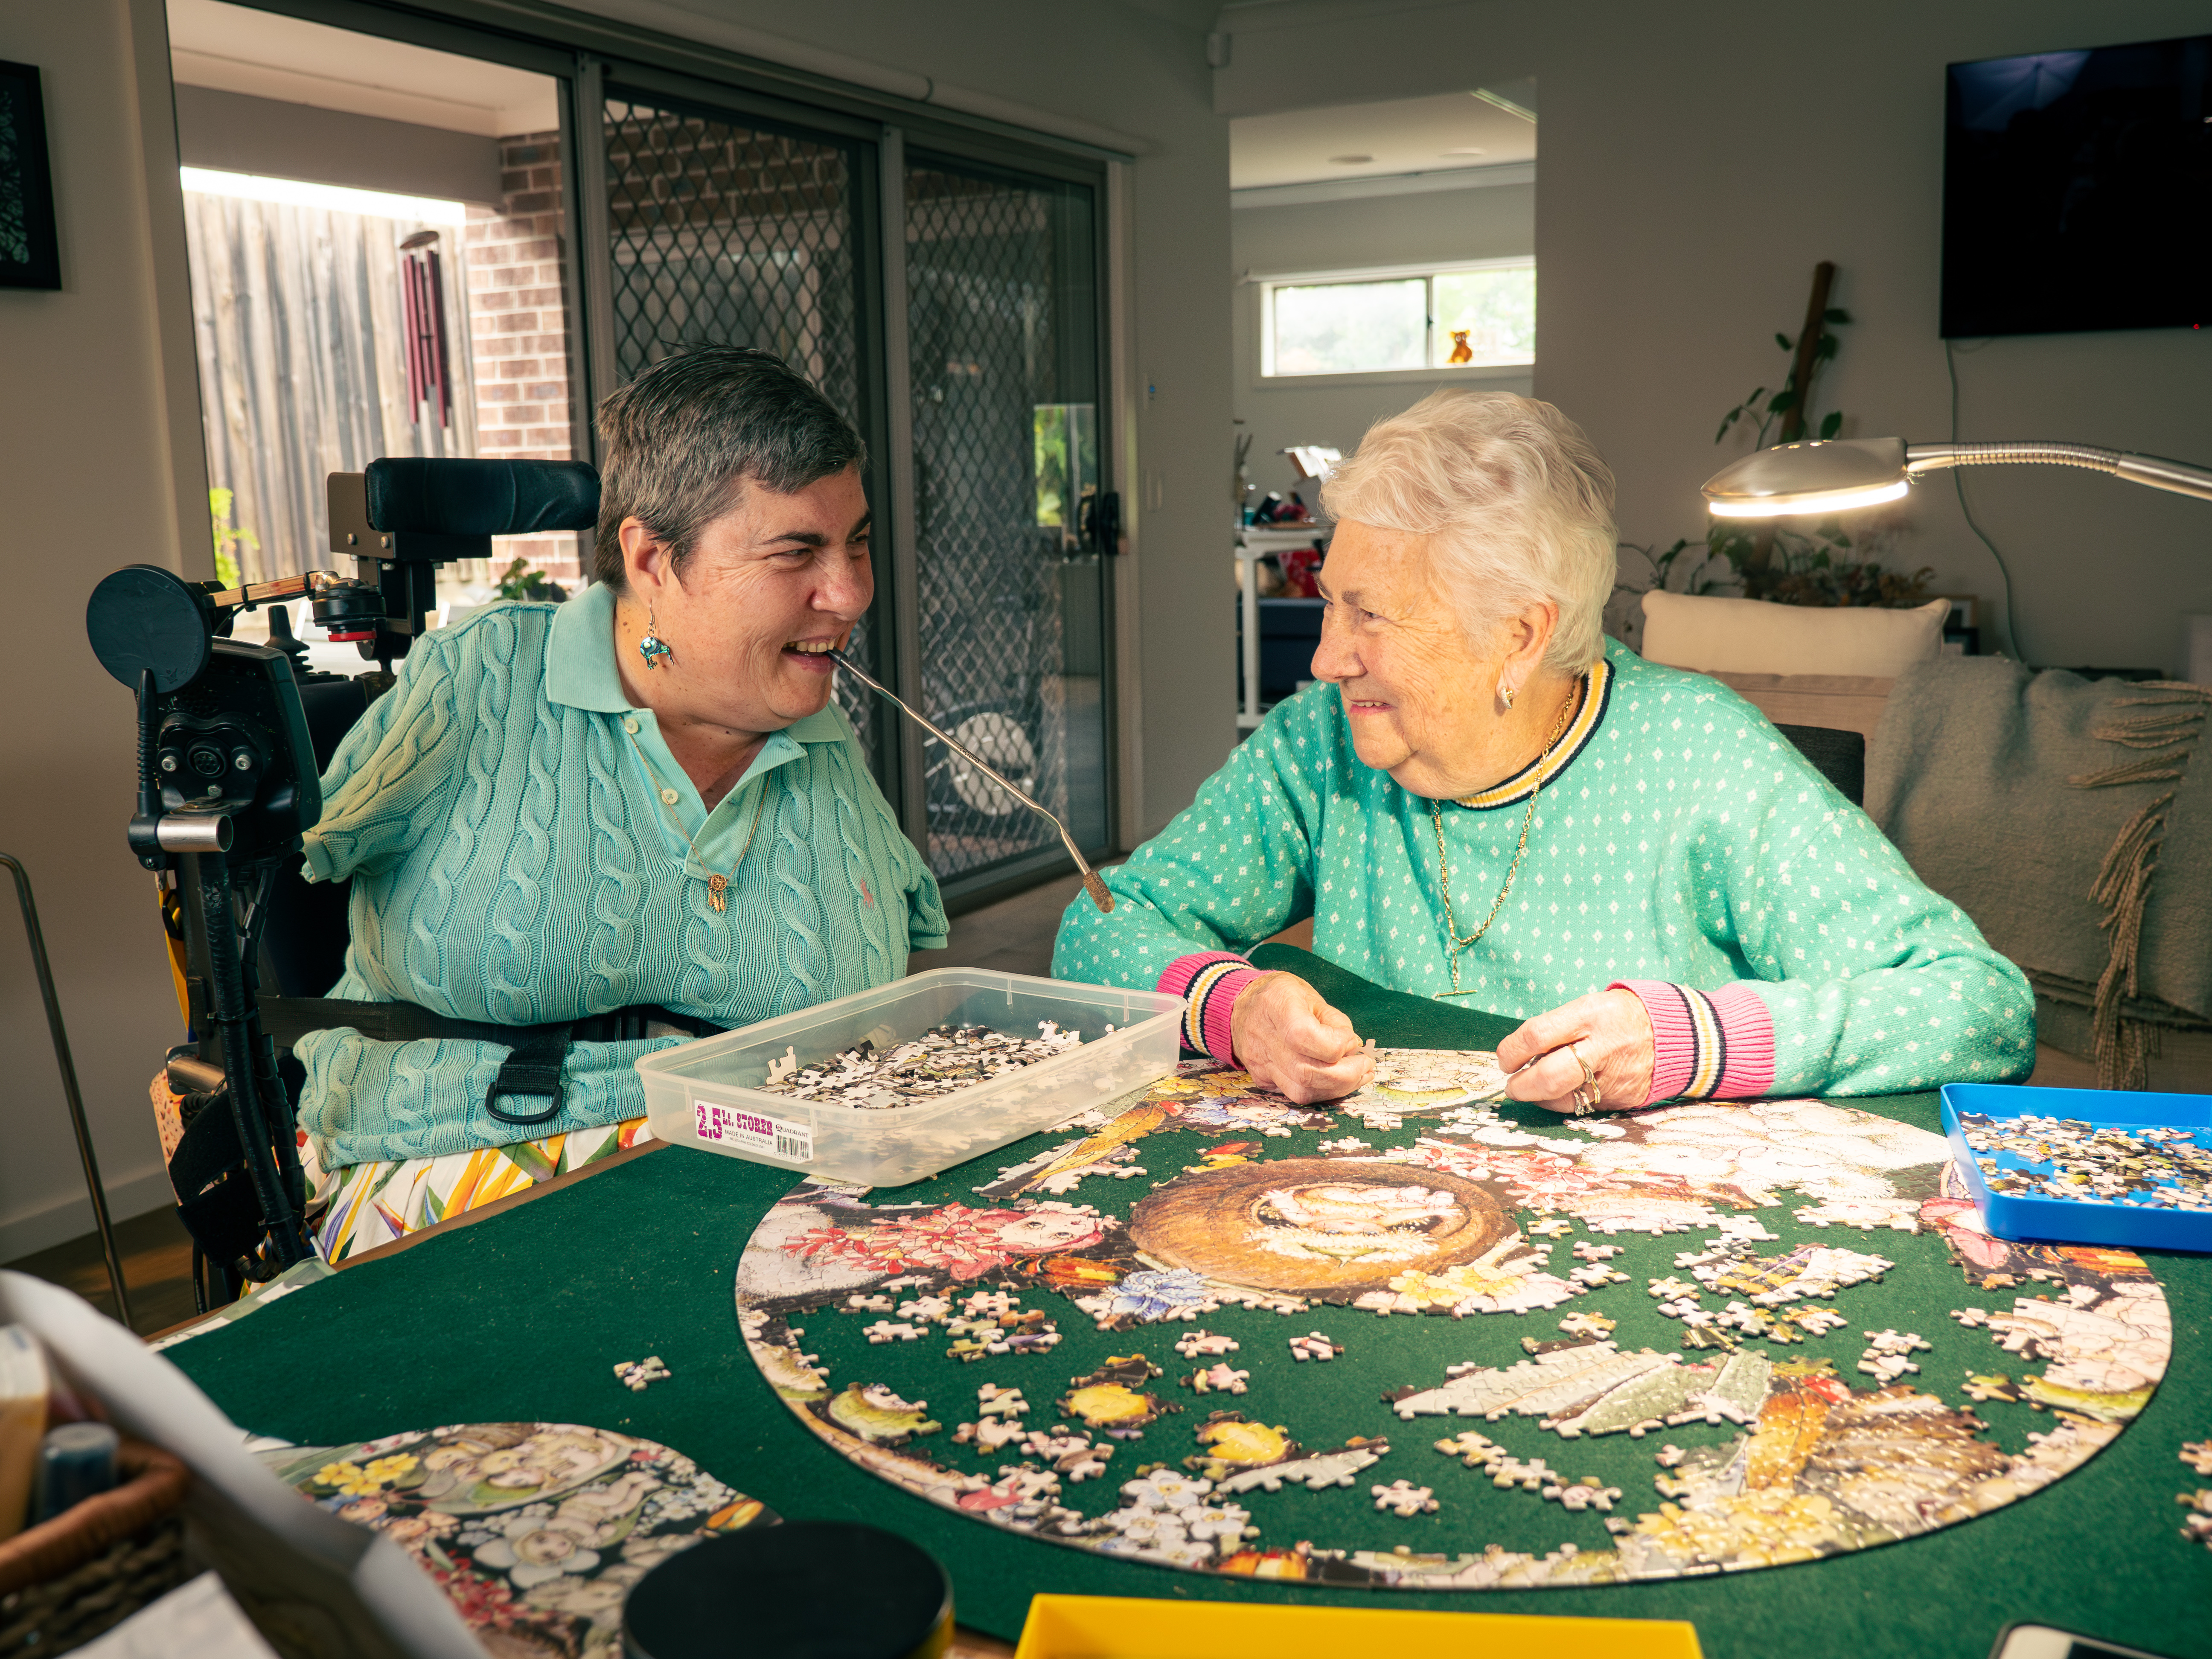 A picture of two women sitting at a table smiling while they are completing.a jigsaw puzzle.They are both wearing green tops and the woman on the left is sitting in a wheelchair and has no arms. 